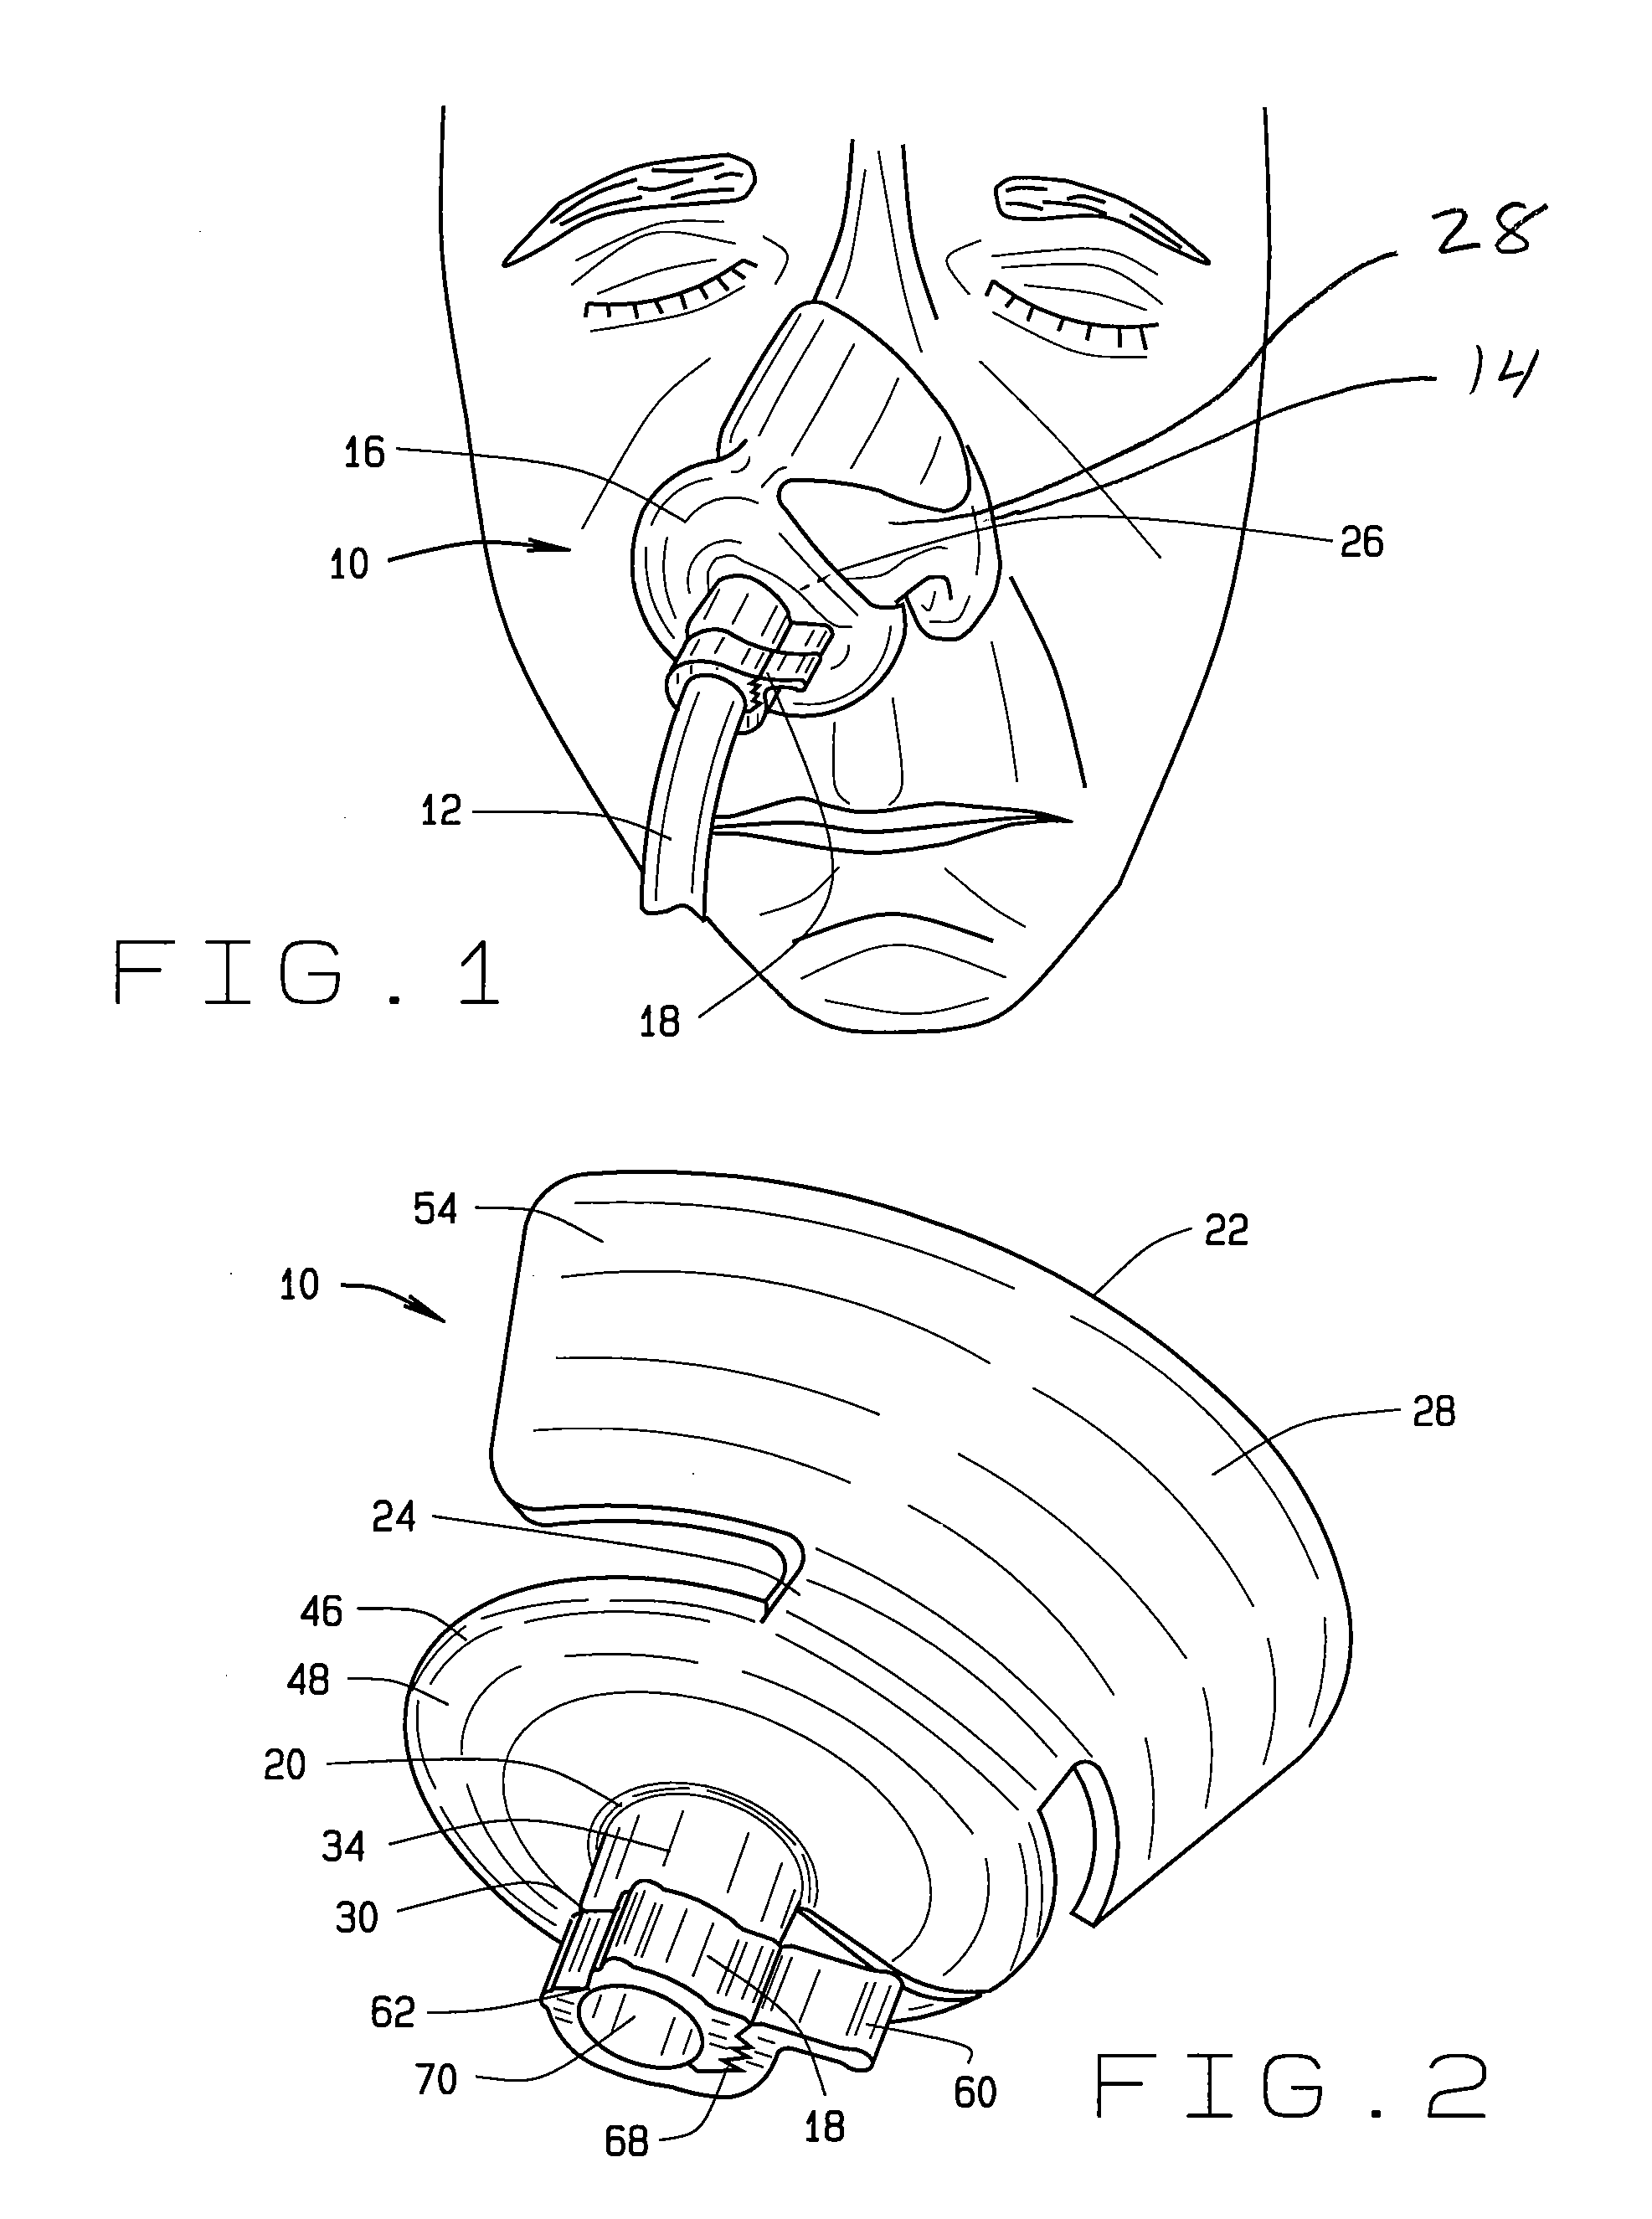 Nasal device and method of positioning nasogastric tubing within a patient